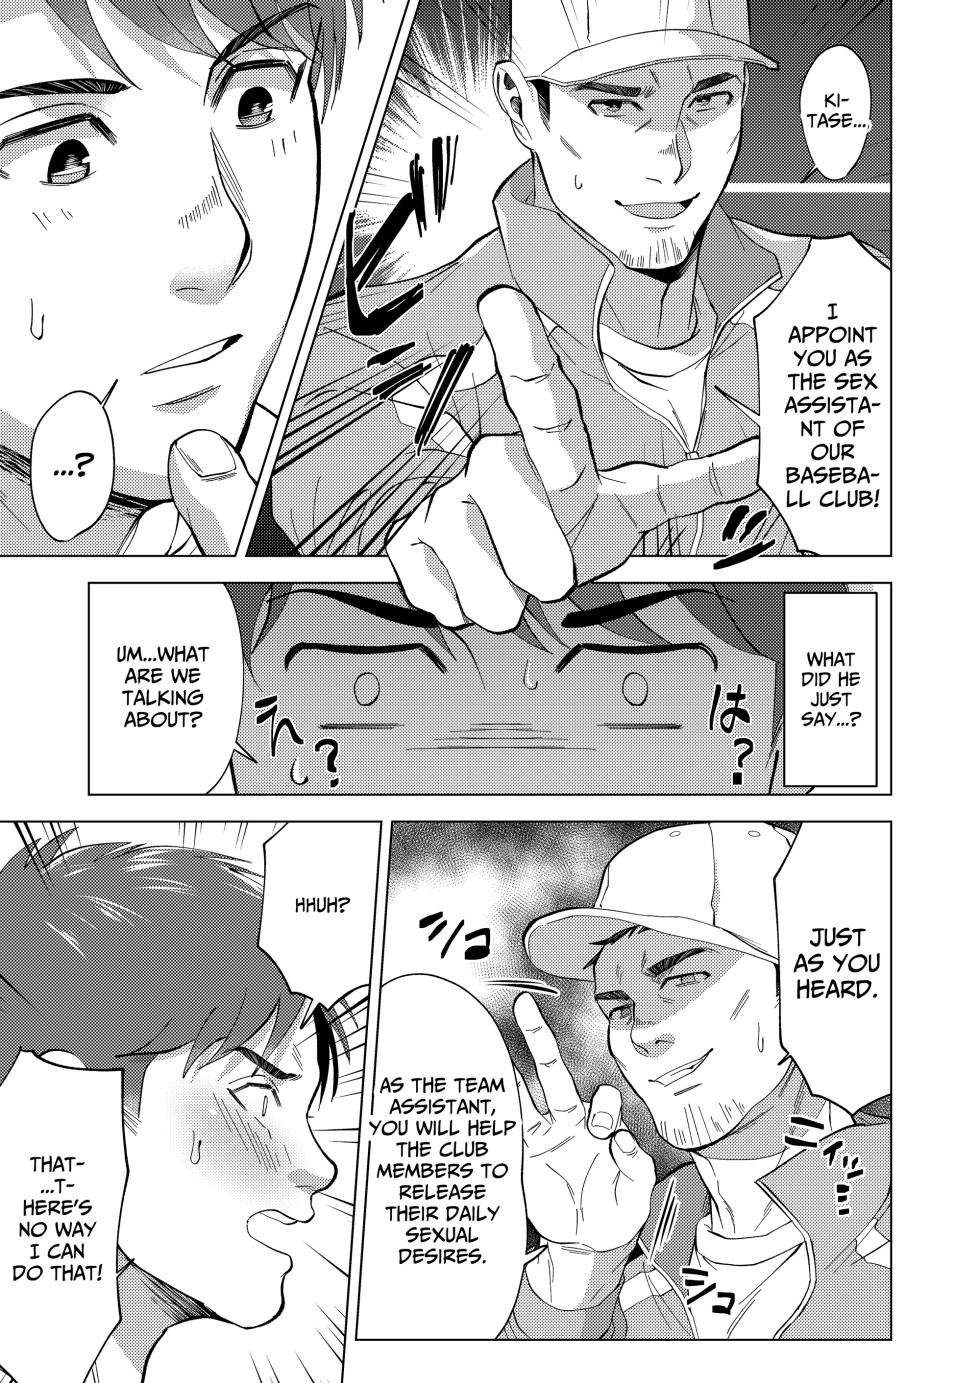 [Shiro] The sex manager of the boys' school baseball team!? [Eng] - Page 5